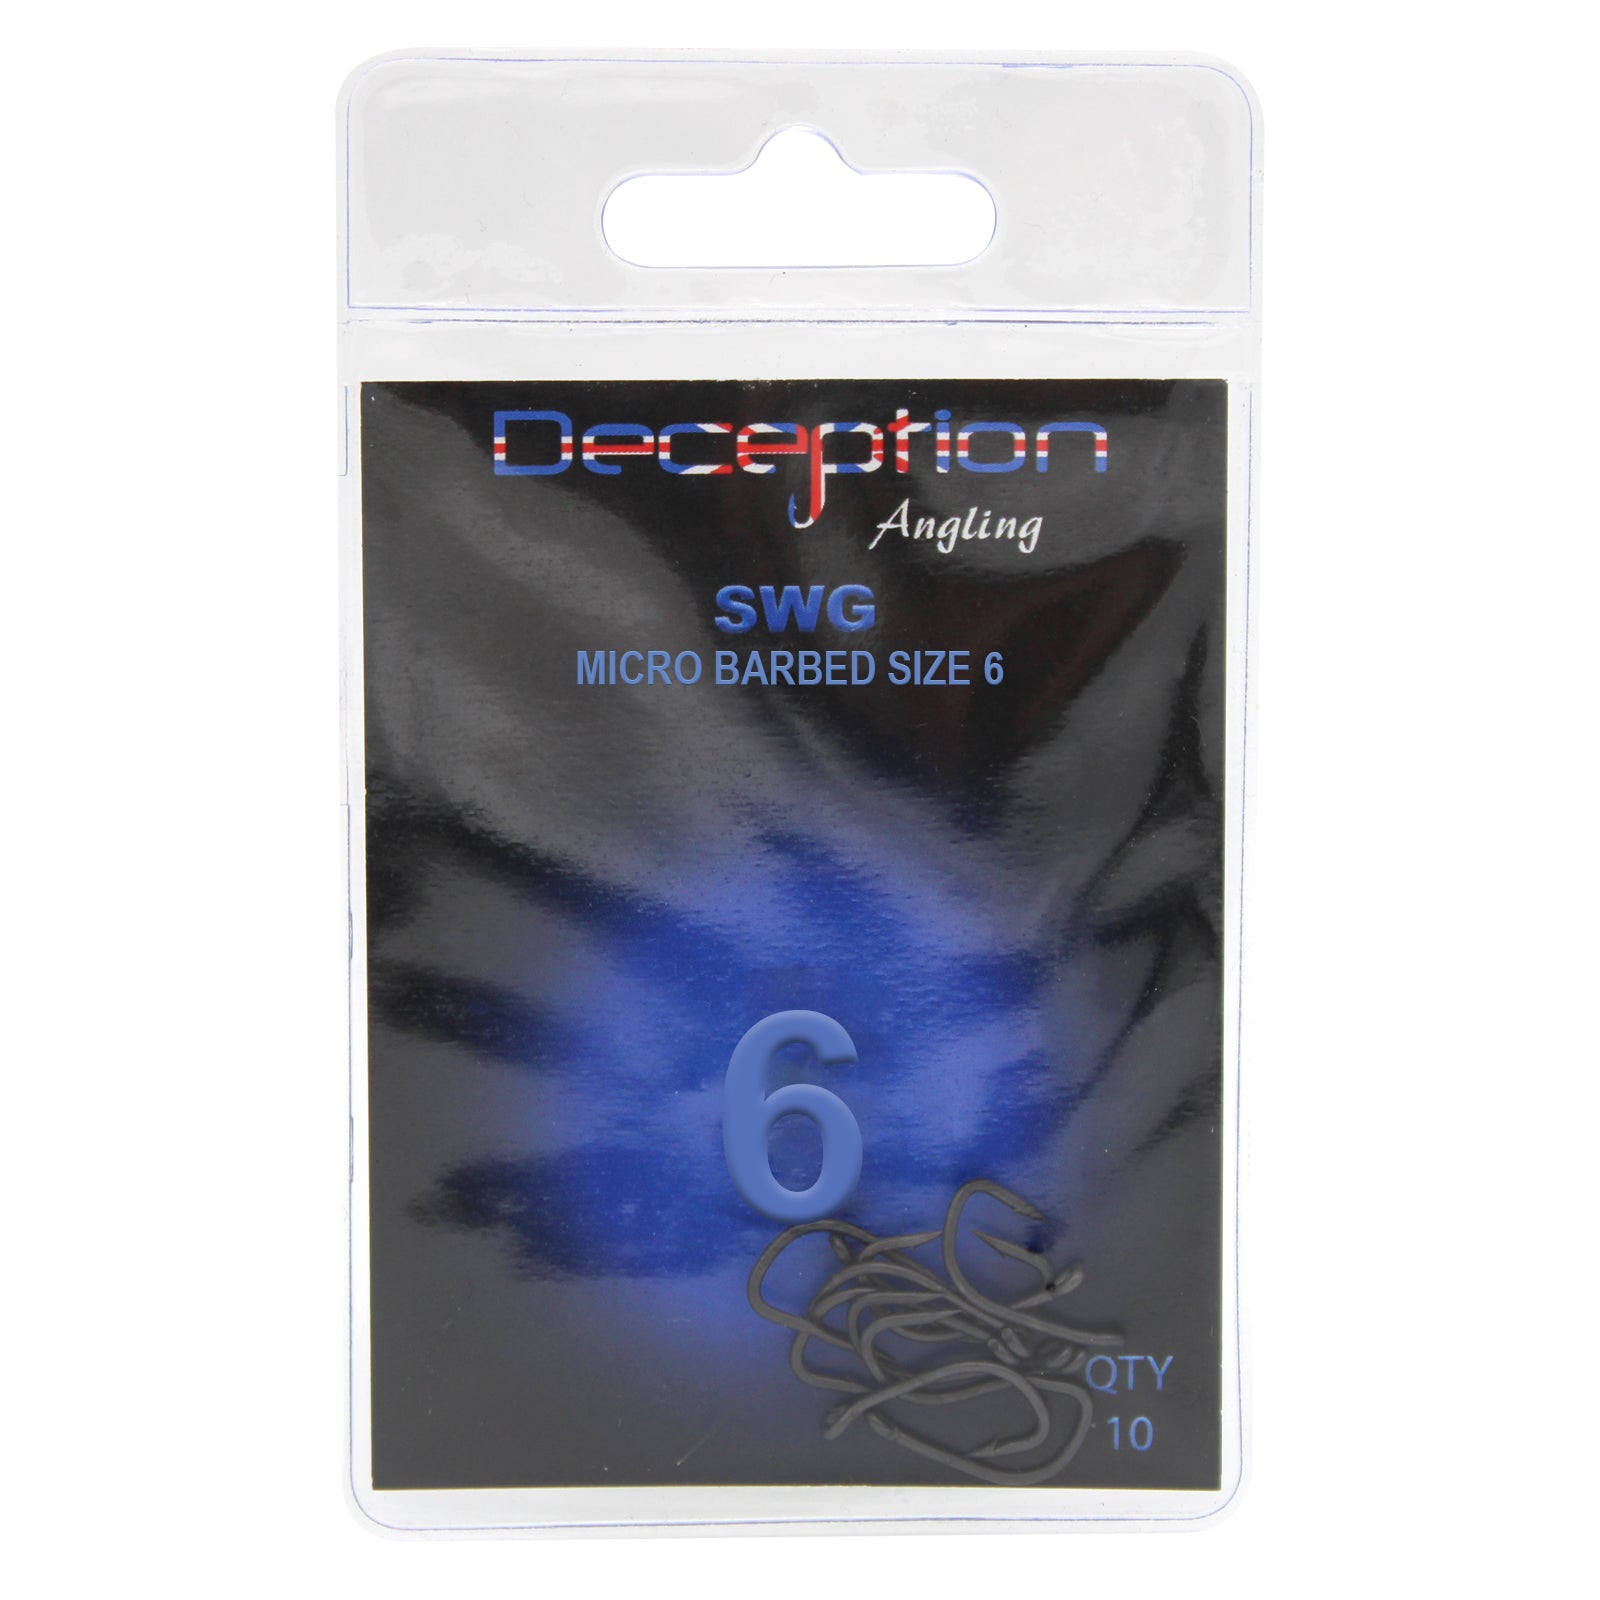 Deception Angling SWG Micro Barbed Hooks Size 6 Pack of 10 for Fishing